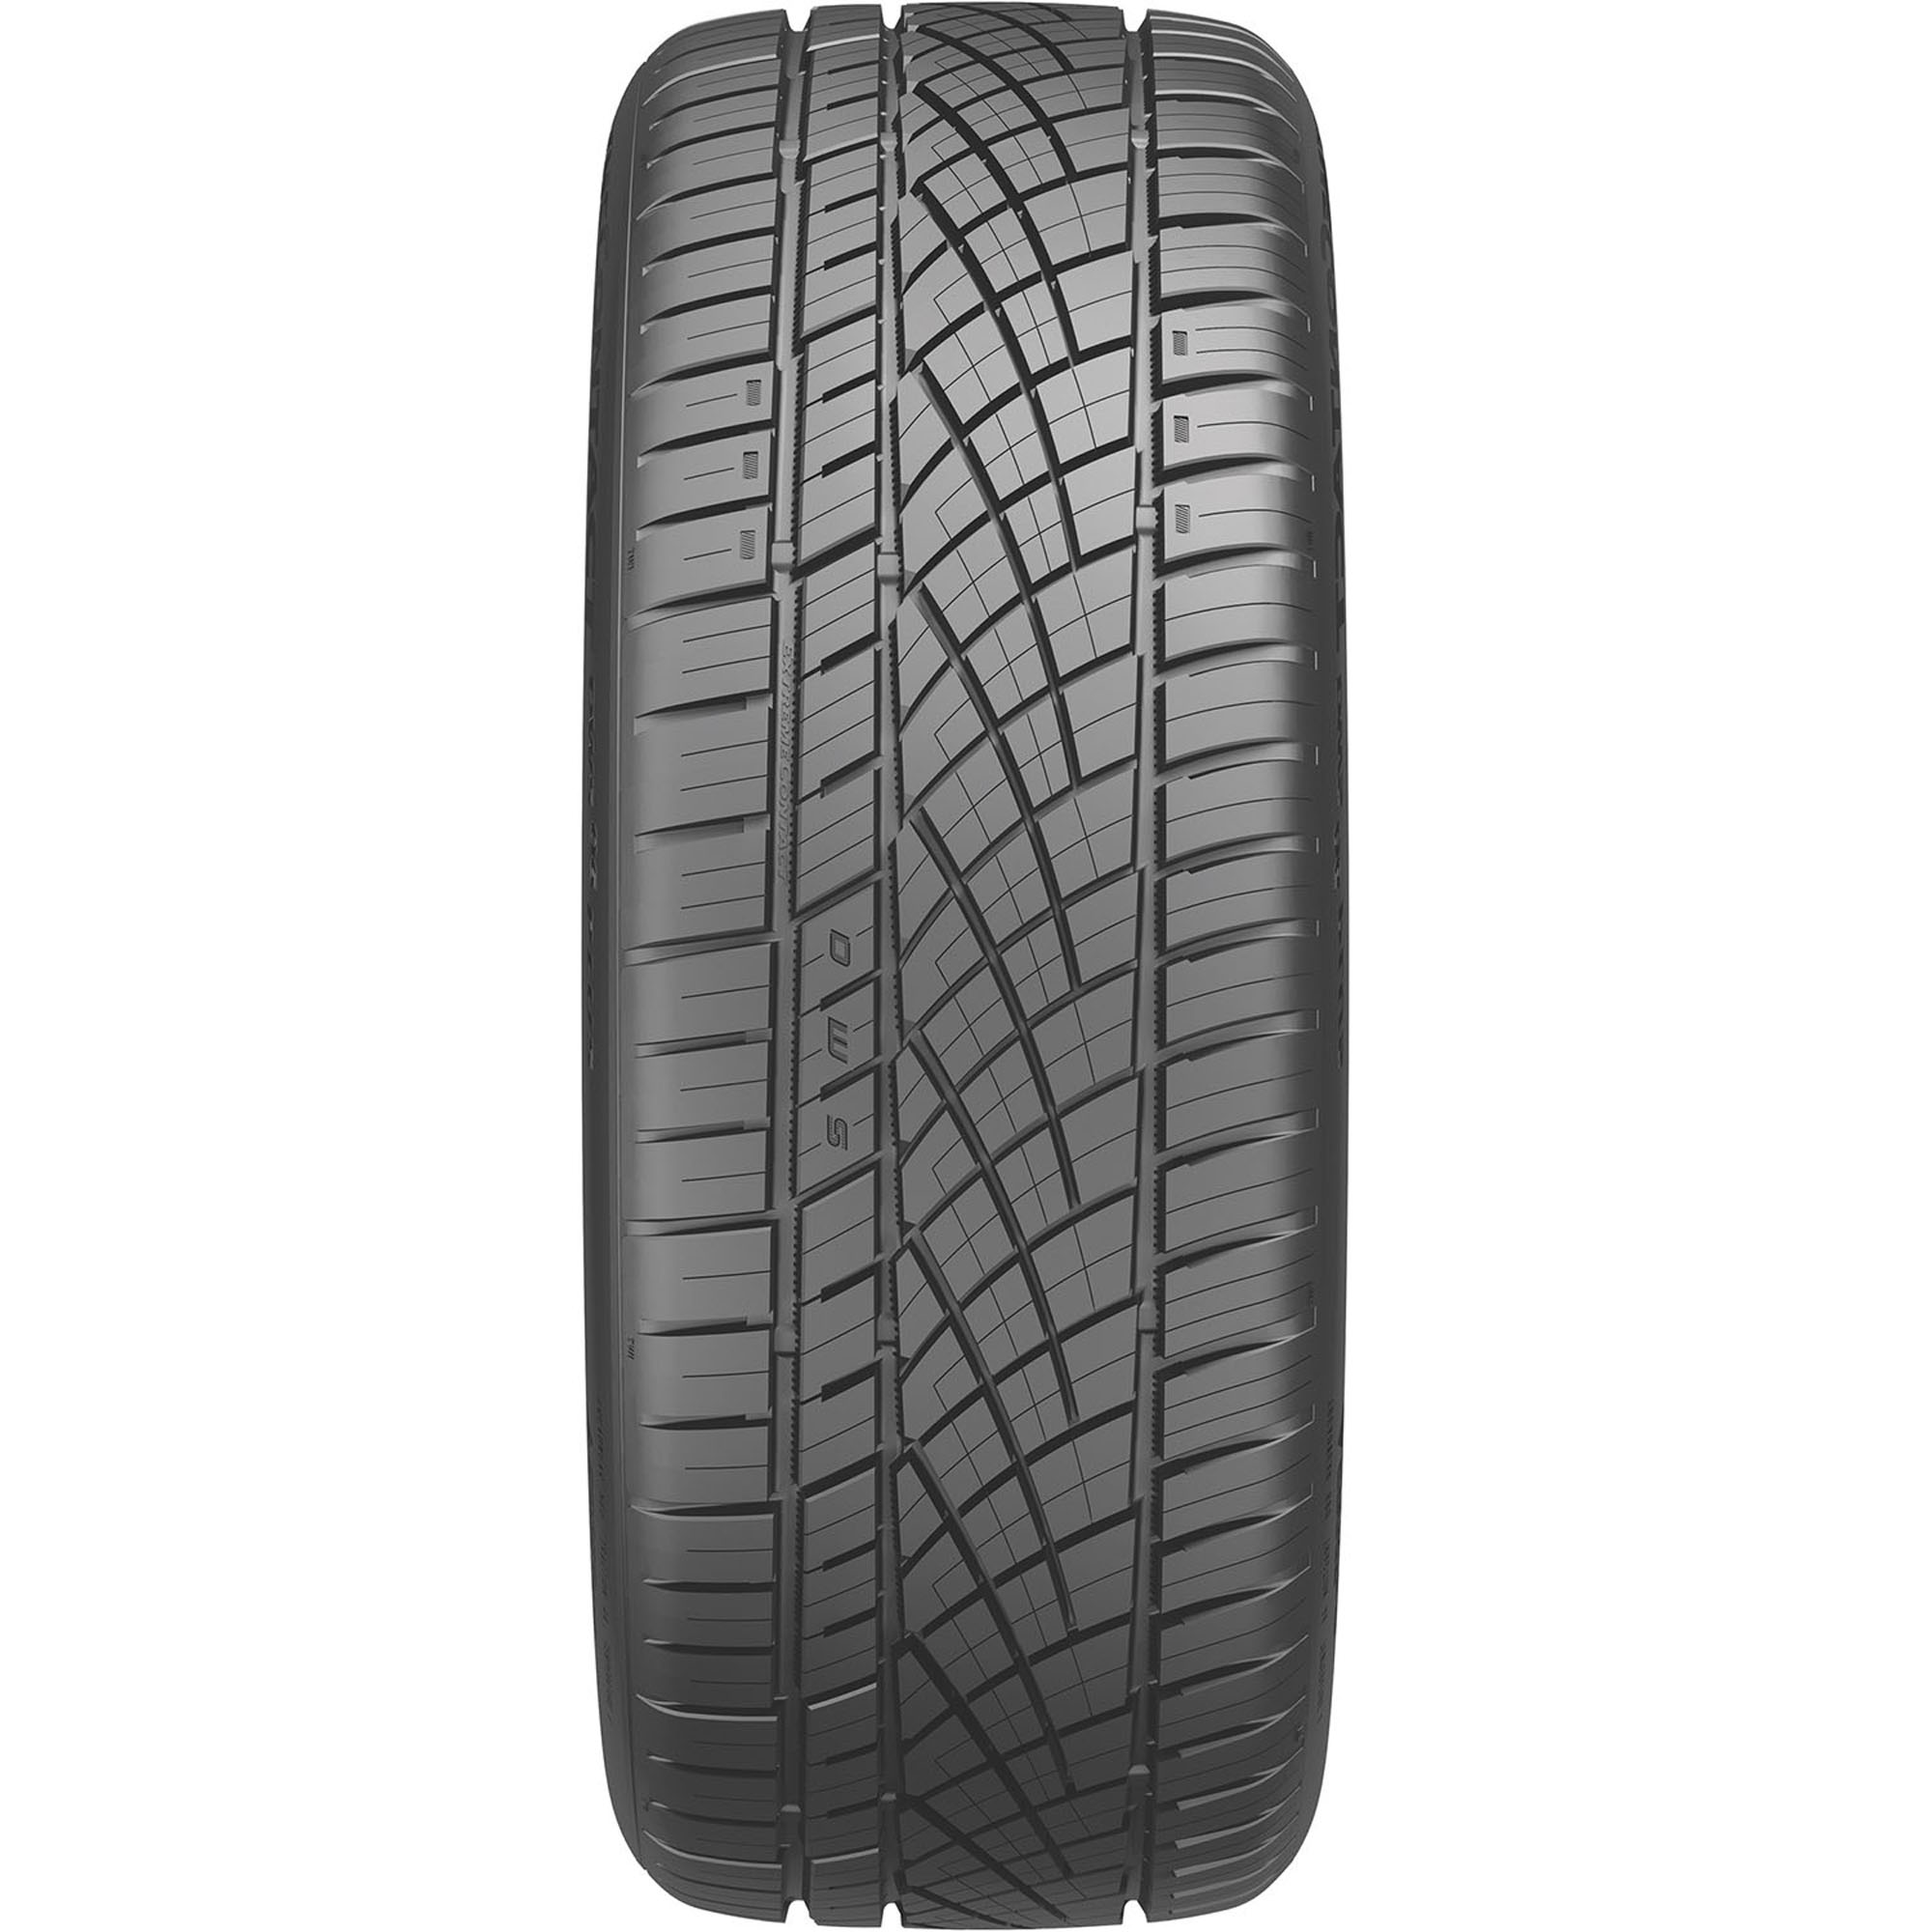 Continental ExtremeContact DWS06 PLUS All Season 275/35ZR20 102Y XL Passenger Tire - image 3 of 6